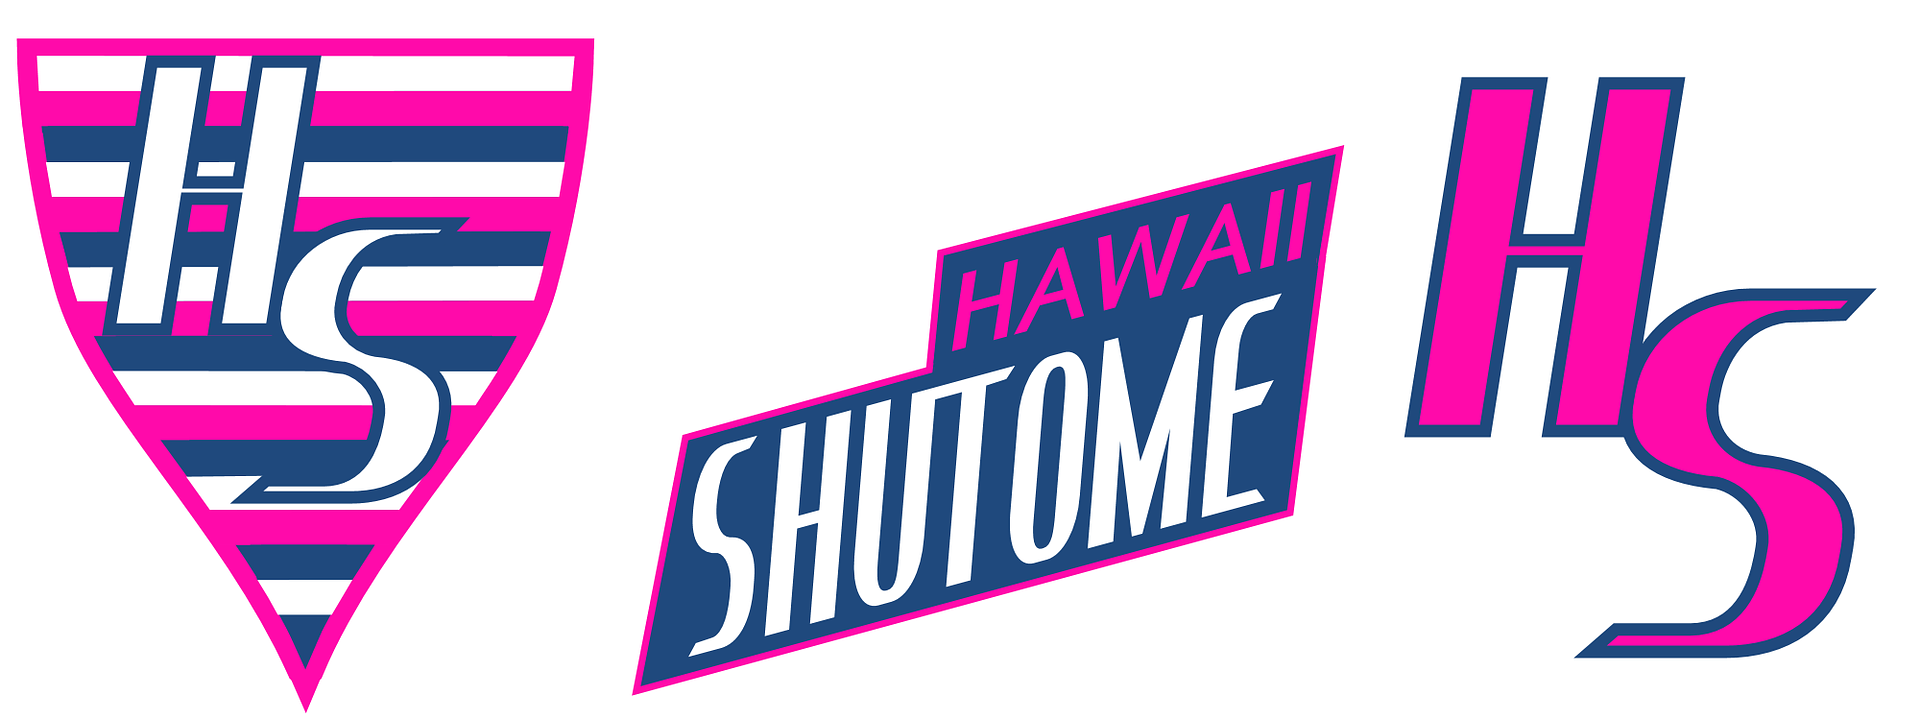 shutome%20secondaries_zpsuopffrw7.png